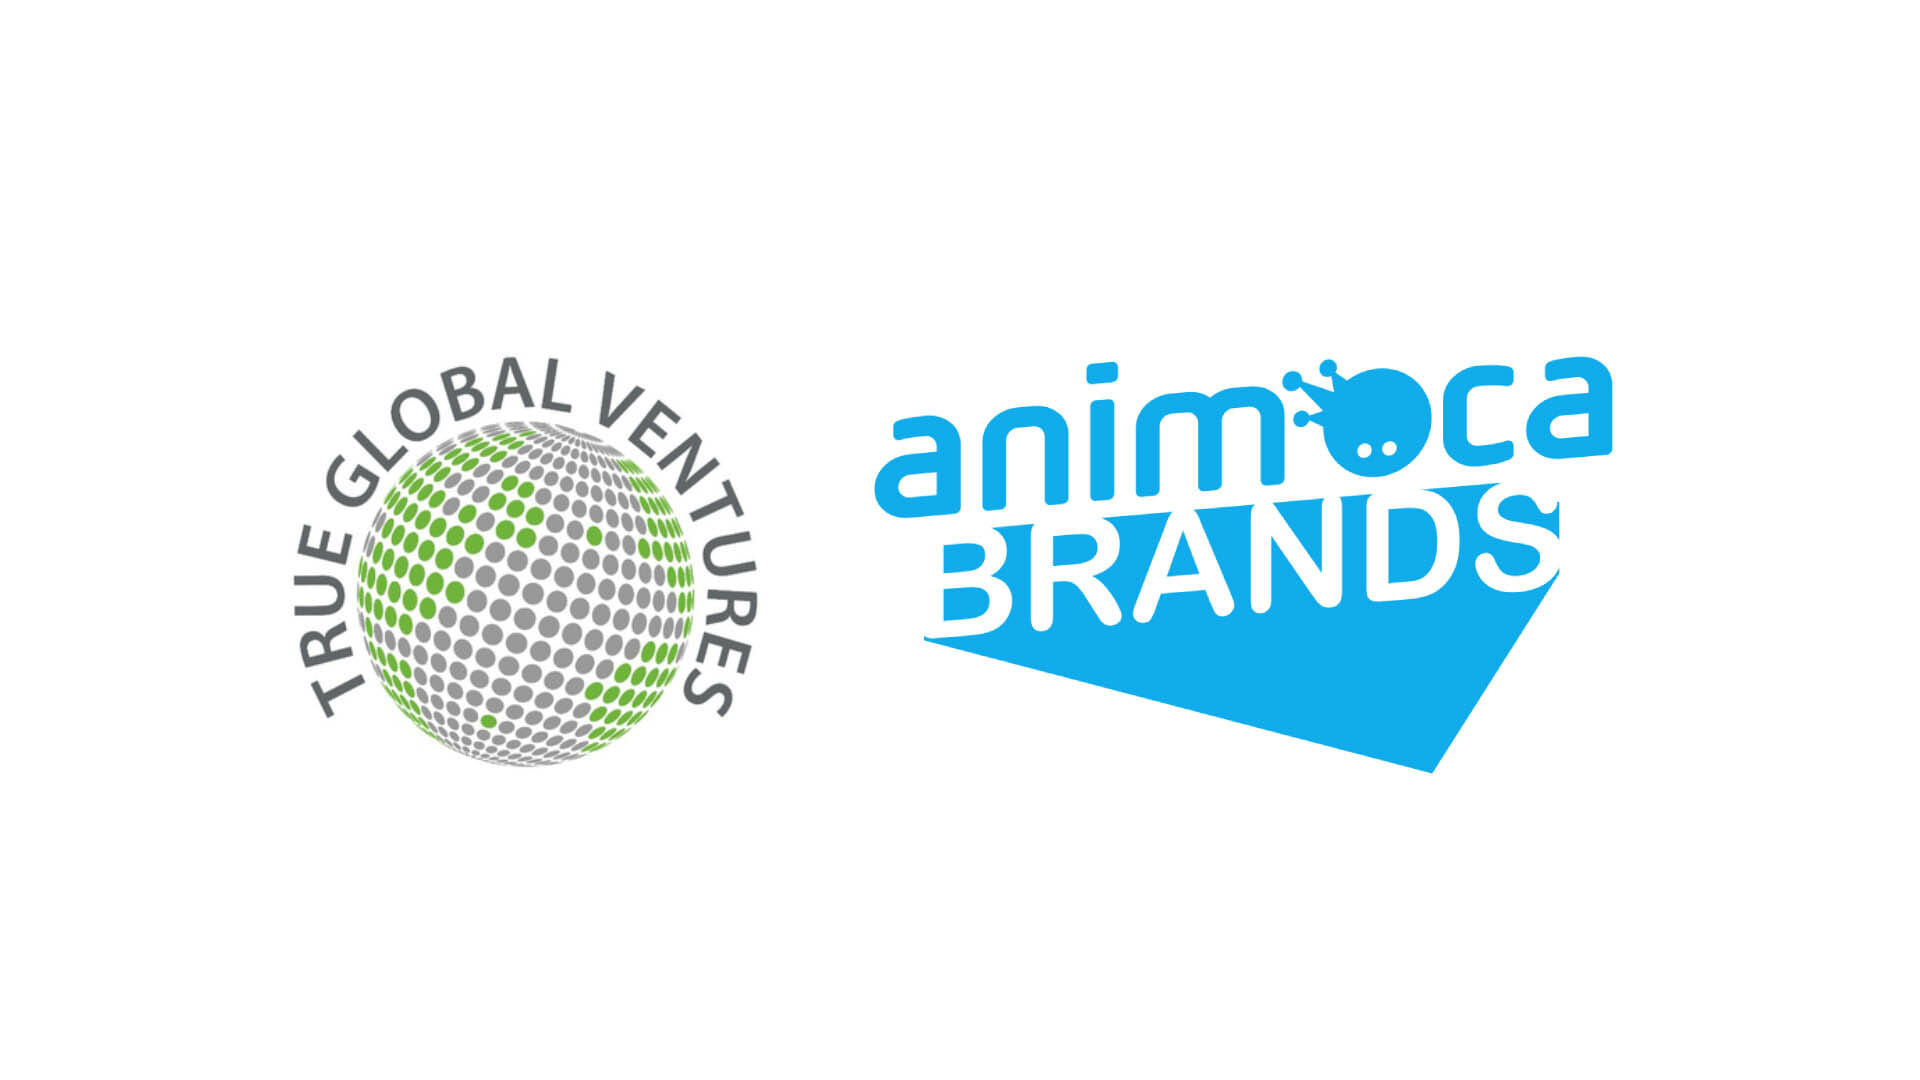 True Global Ventures 4 Plus Follow On Fund invests in web3 leader Animoca Brands